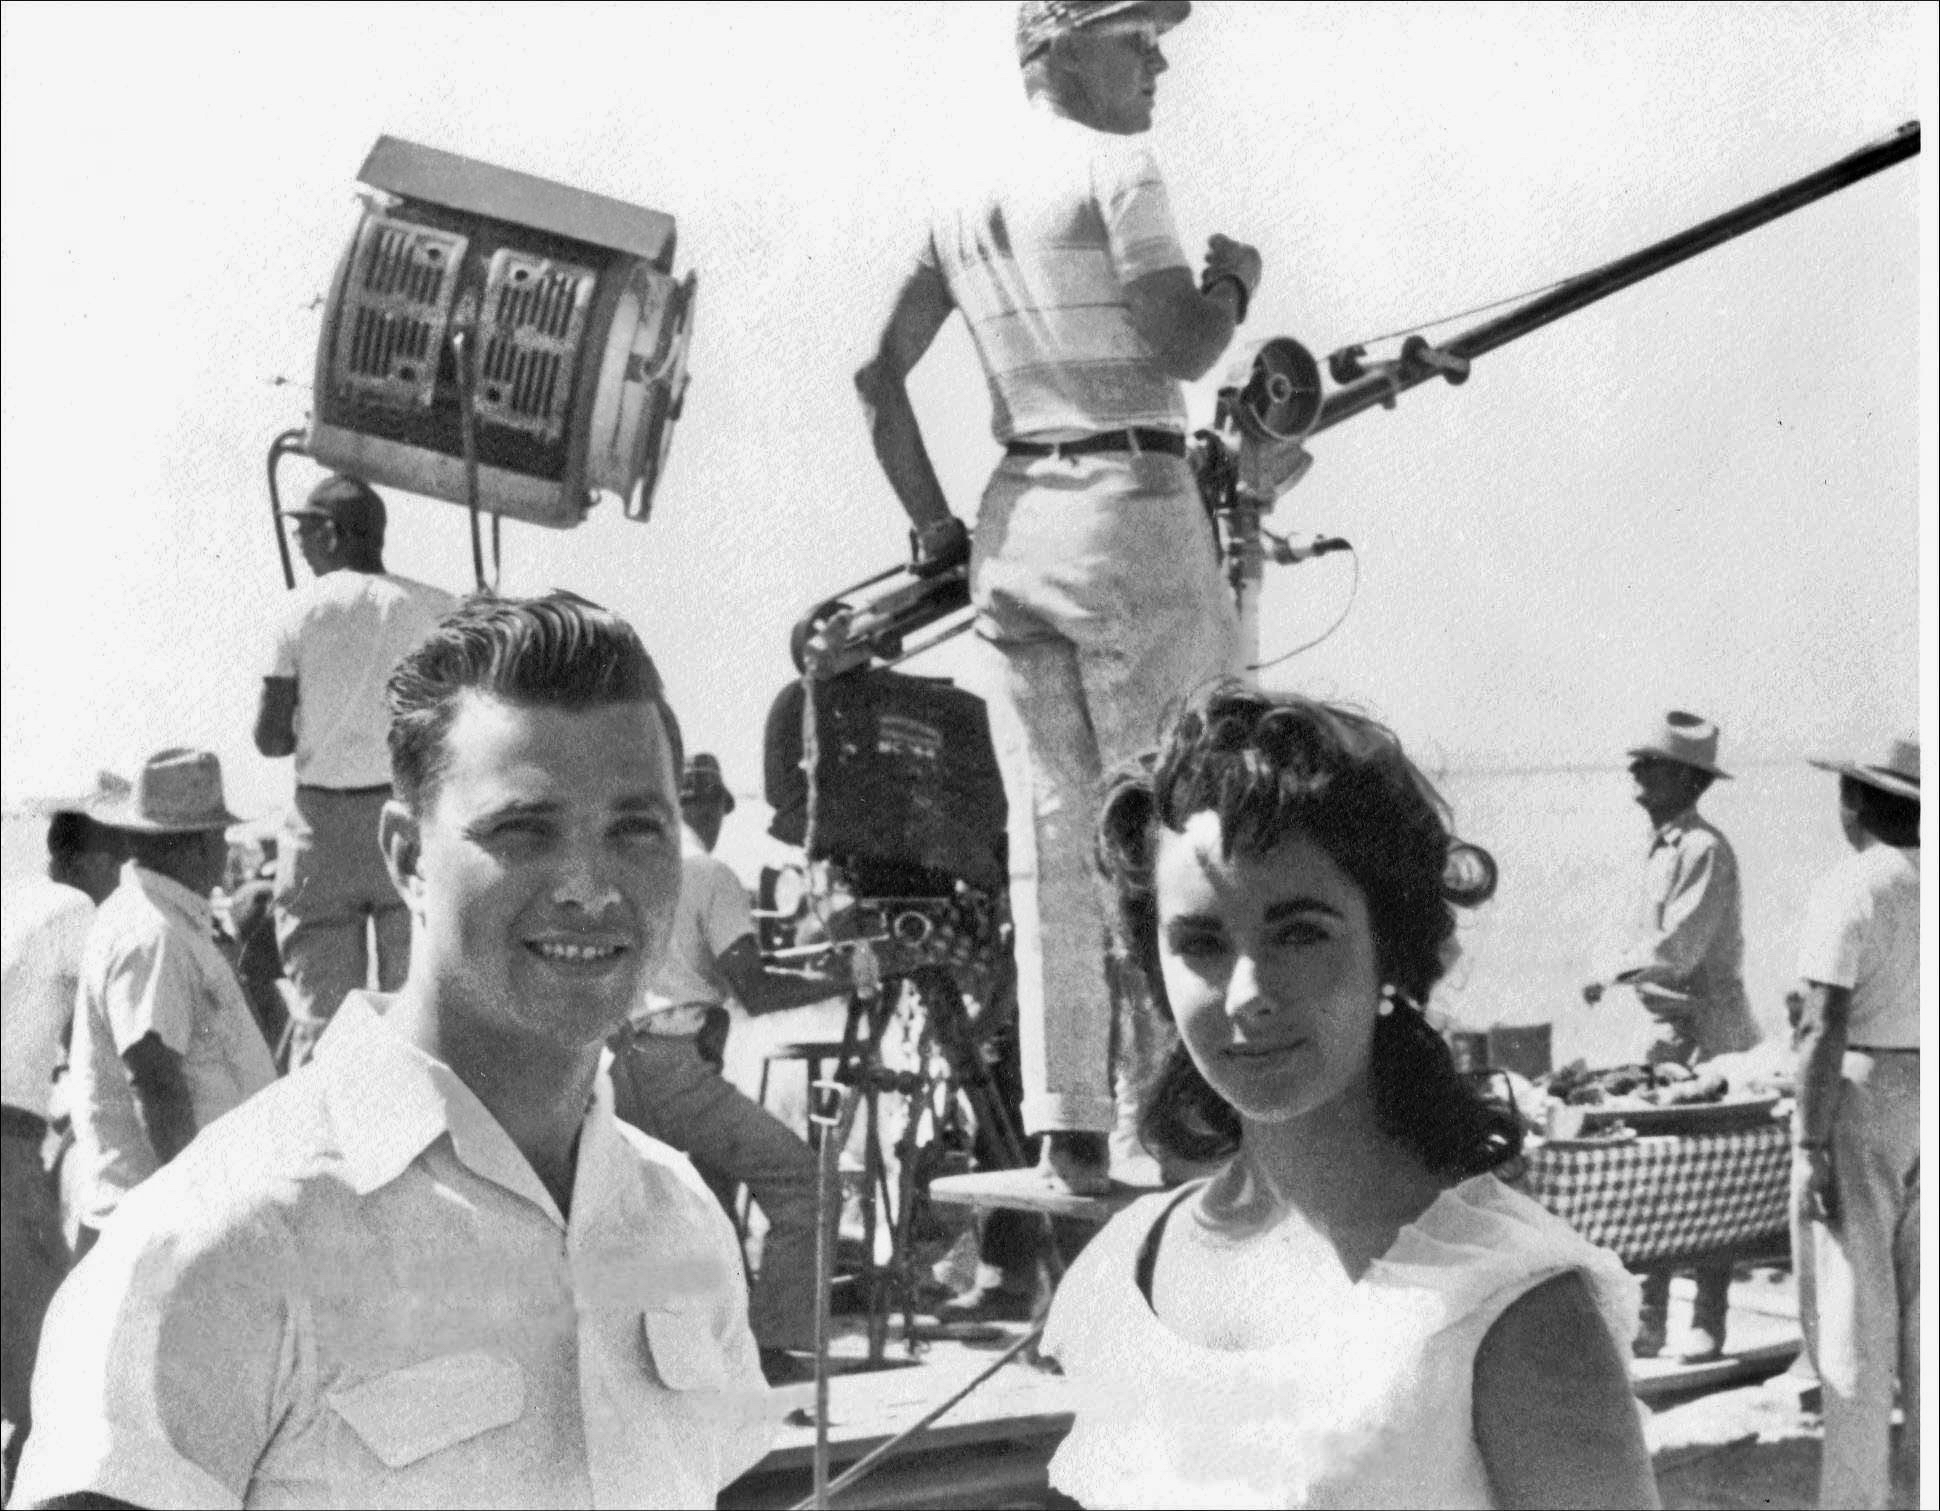 A photo from the set of 'Giant'